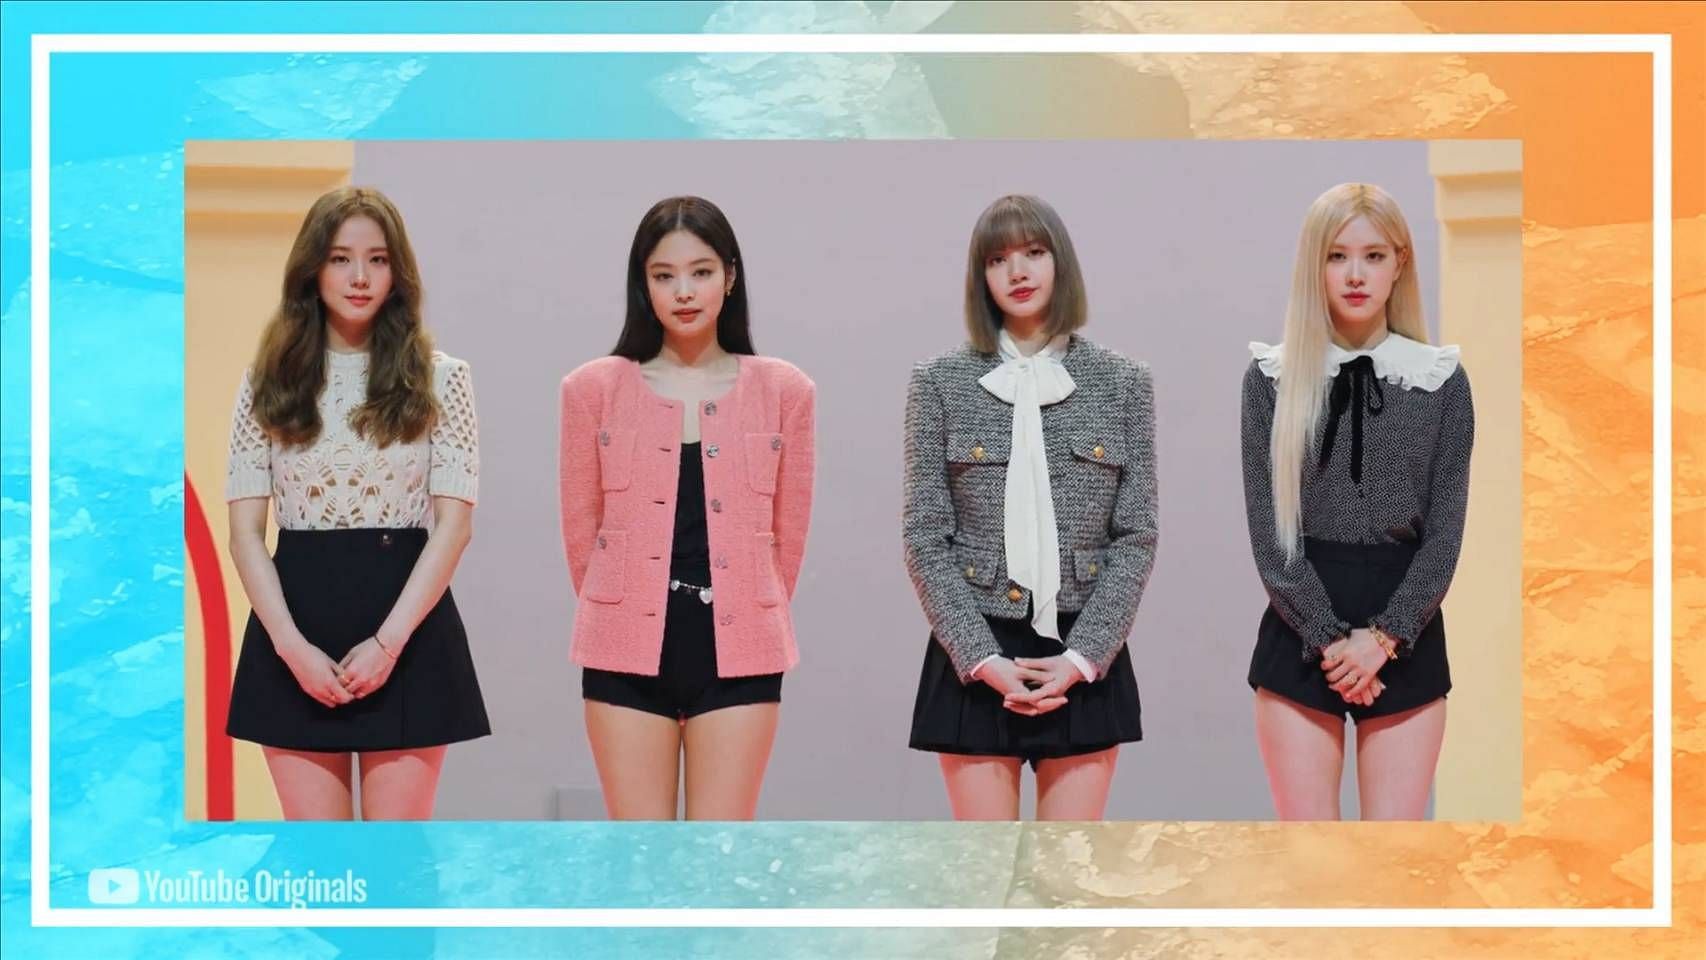 BLACKPINK turn climate change activist for Dear Earth project (Image via YouTube)